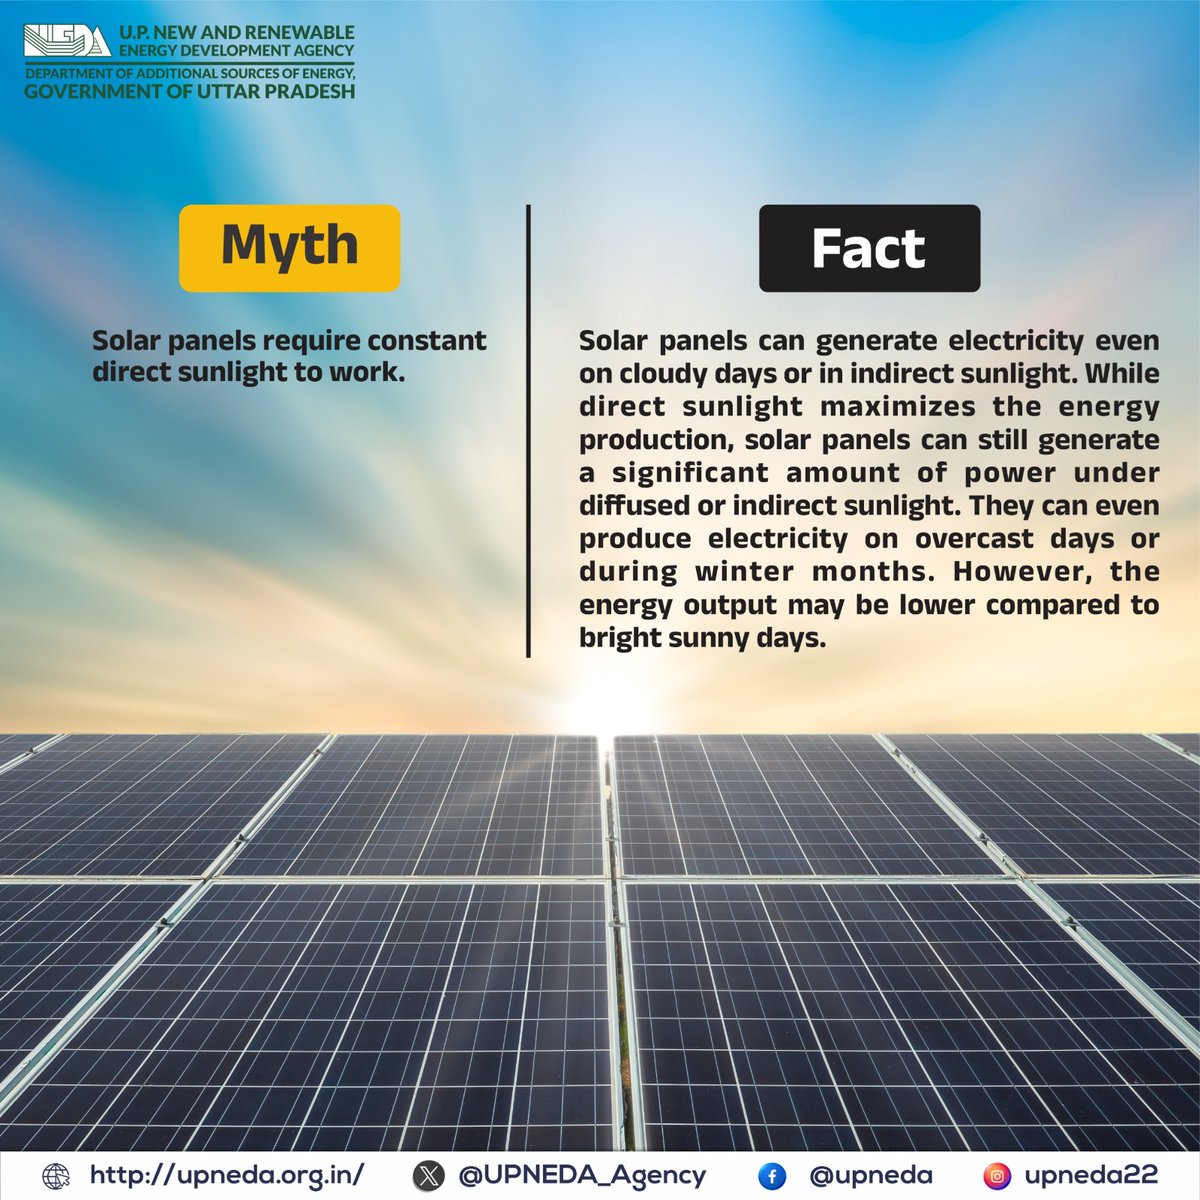 It is true that direct sunlight maximizes energy production but solar panels can generate electricity even on cloudy days. They are a reliable source of clean energy. 

#SolarPower #SolarEnergy #SustainablePower 
#UPNEDA #RenewableEnergy #upneda_agency
@CMOfficeUP
@aksharmaBharat